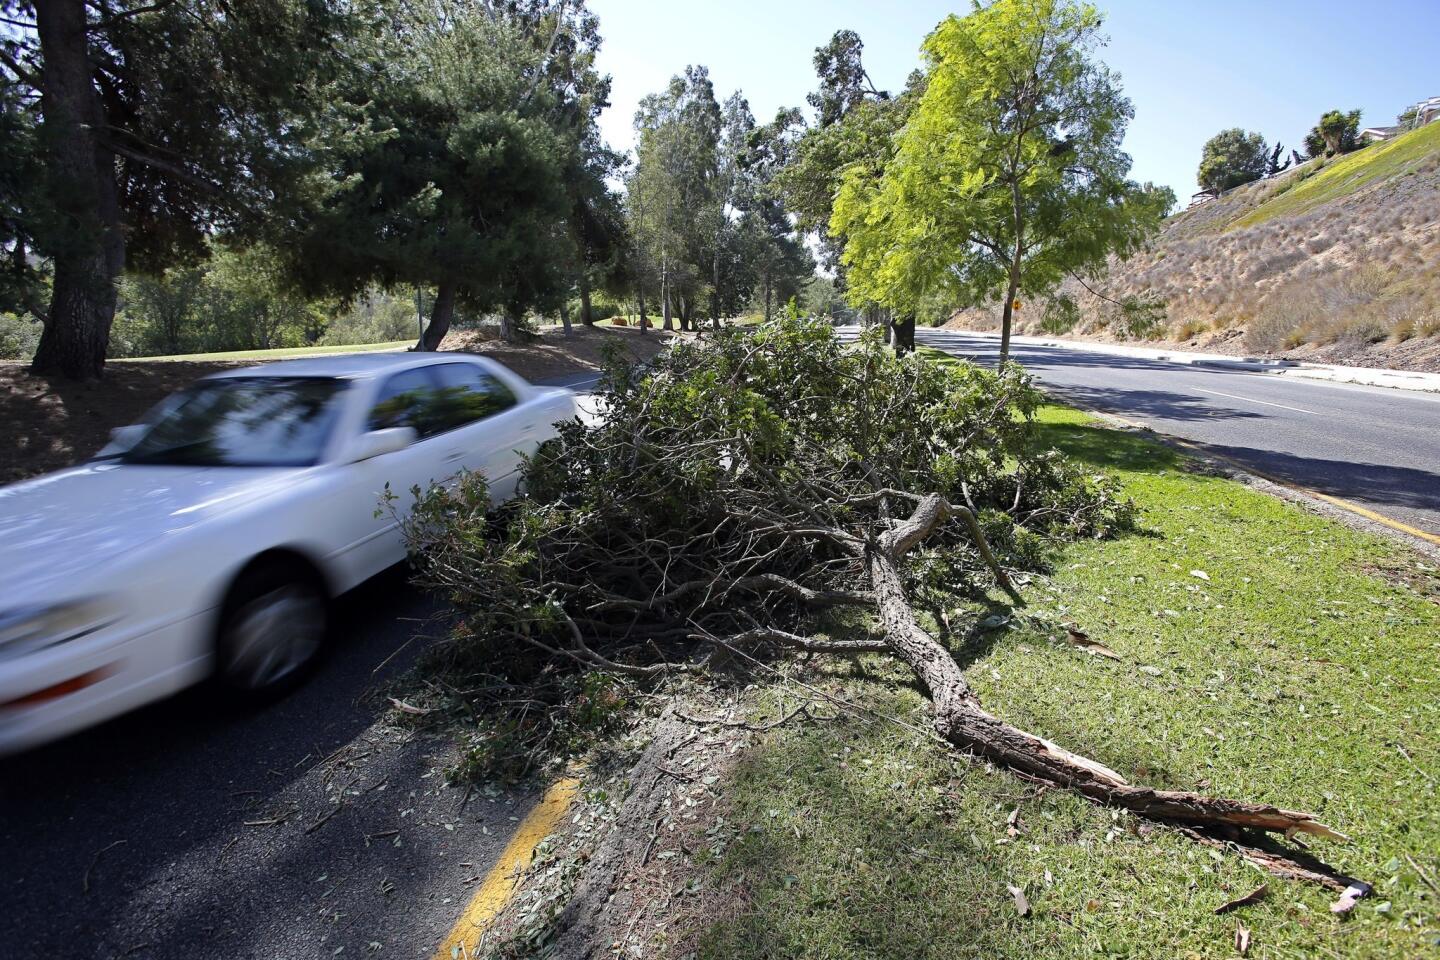 A fallen tree branch just misses a car on Olsen Road in Thousand Oaks. Strong winds, low humidity, high temperatures and very dry brush have combined to make for high fire danger.